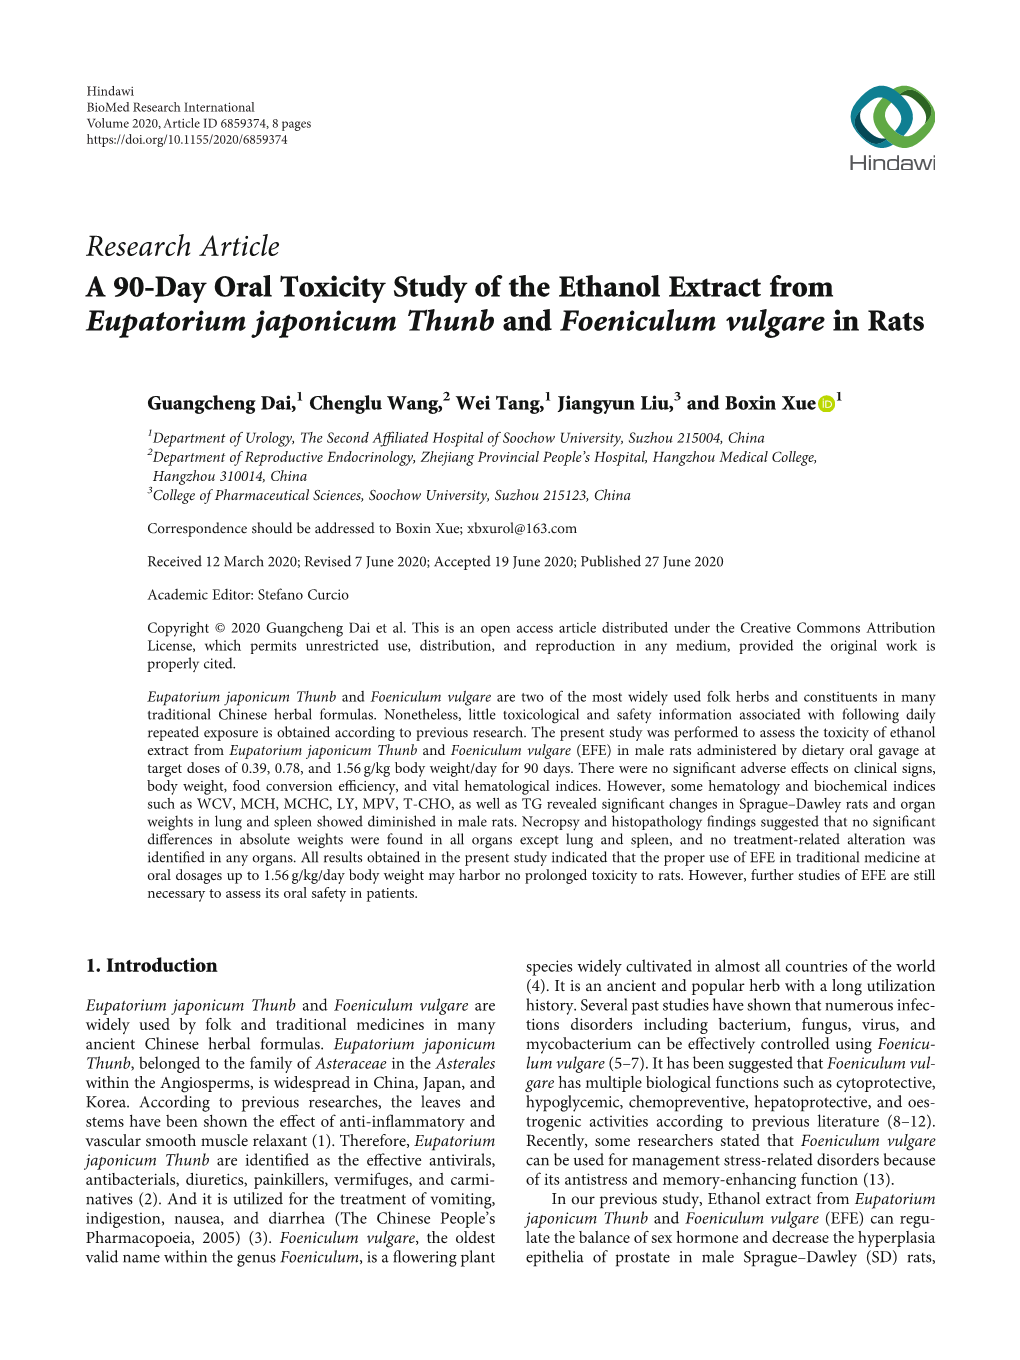 A 90-Day Oral Toxicity Study of the Ethanol Extract from Eupatorium Japonicum Thunb and Foeniculum Vulgare in Rats